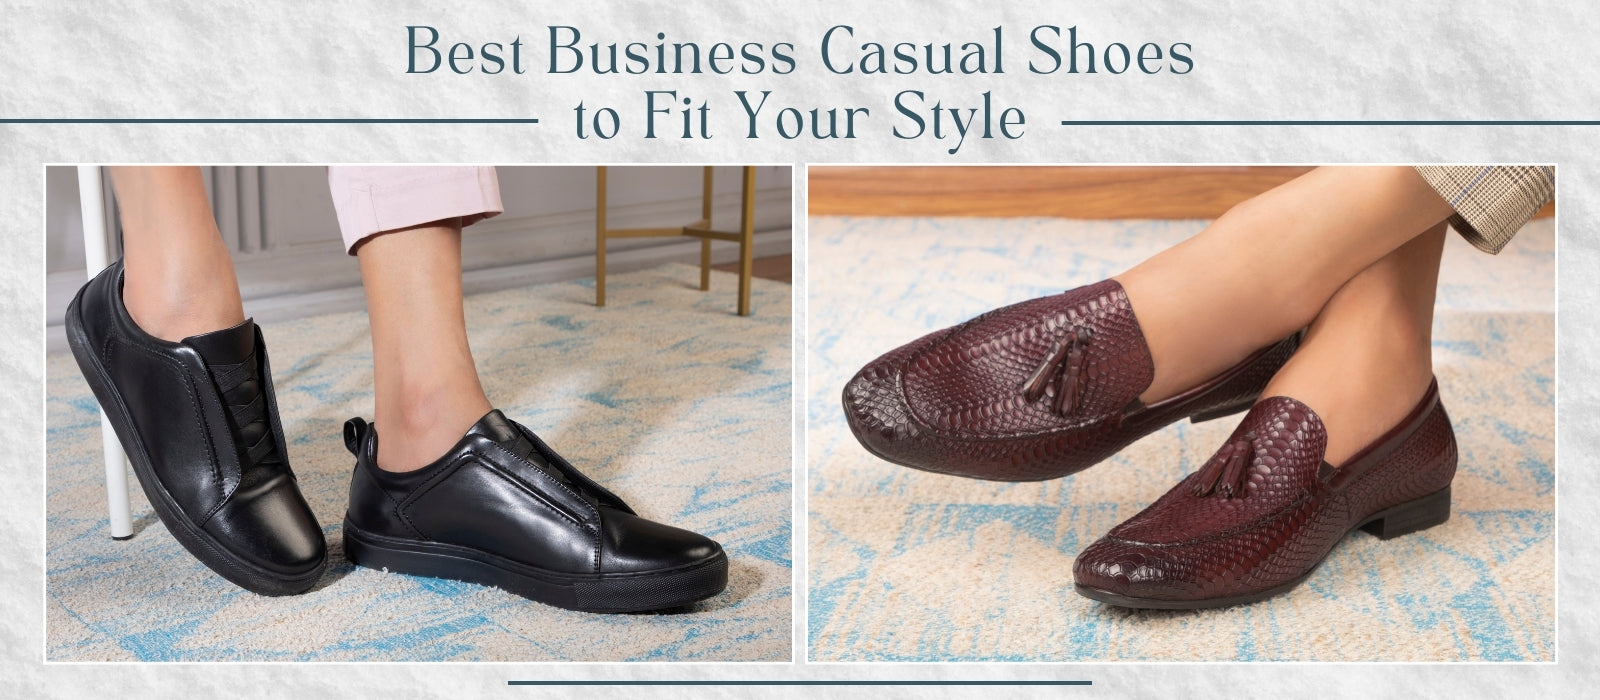 7 Best Business Casual Shoes to Fit Your Style